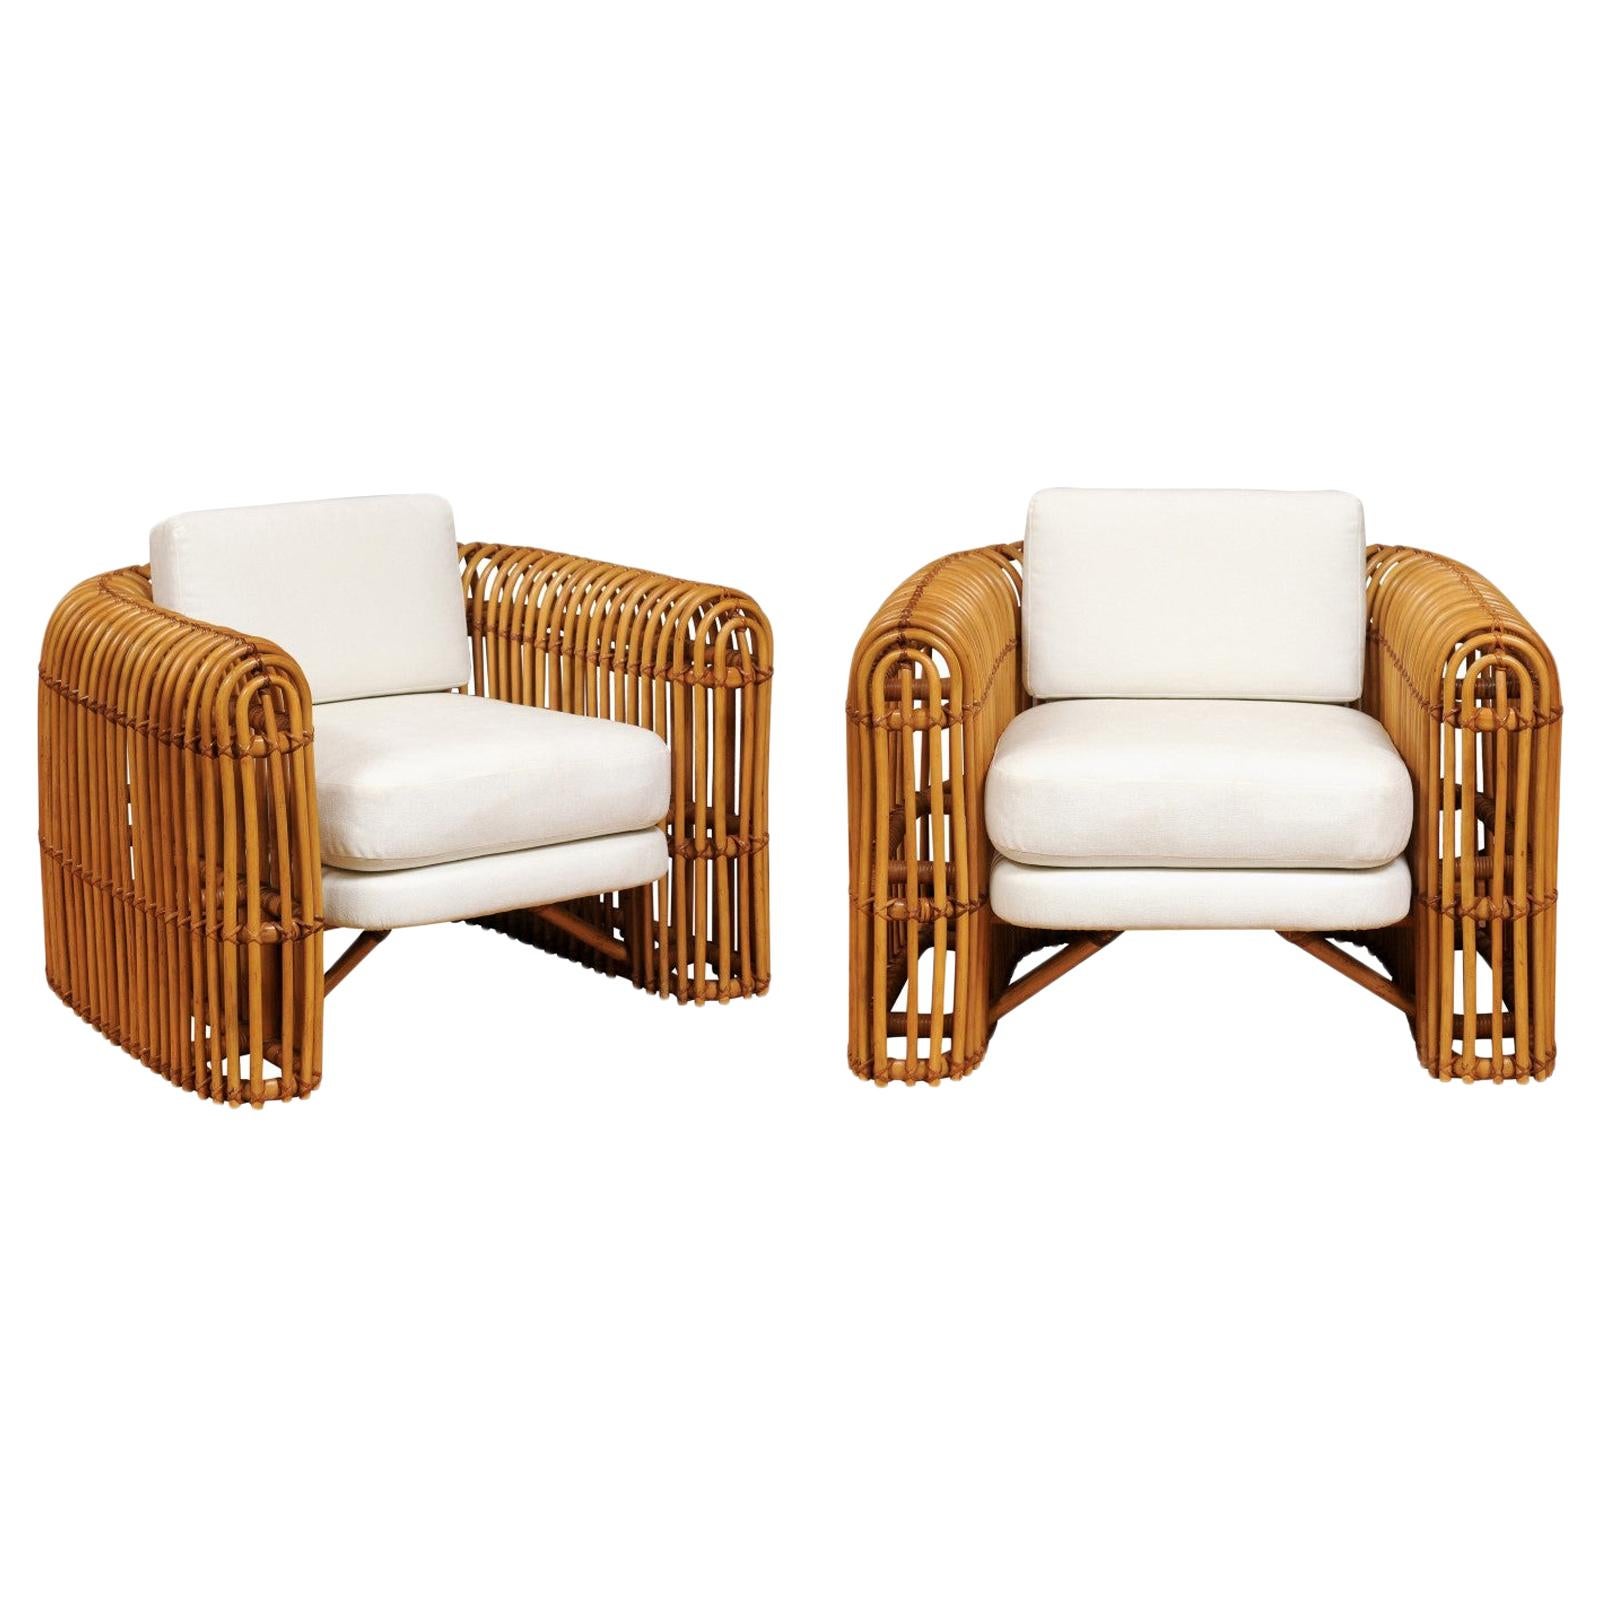 Brilliant Pair of Rattan and Cane Rib Series Club Chairs by Henry Olko, 1978 For Sale